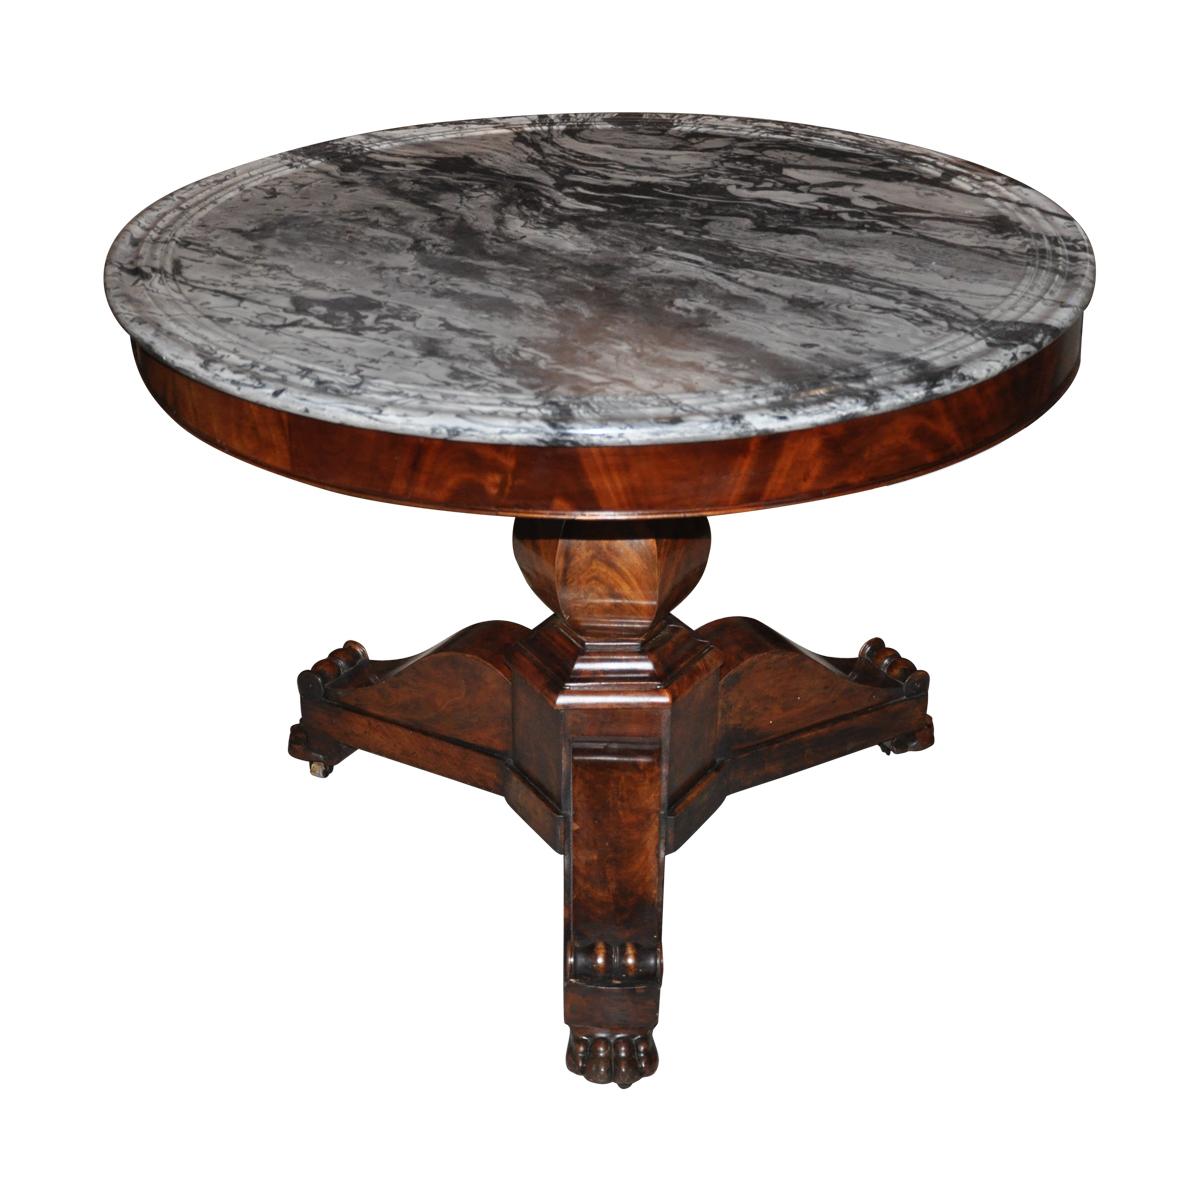 19th Century American Empire Marble-Top Center Table